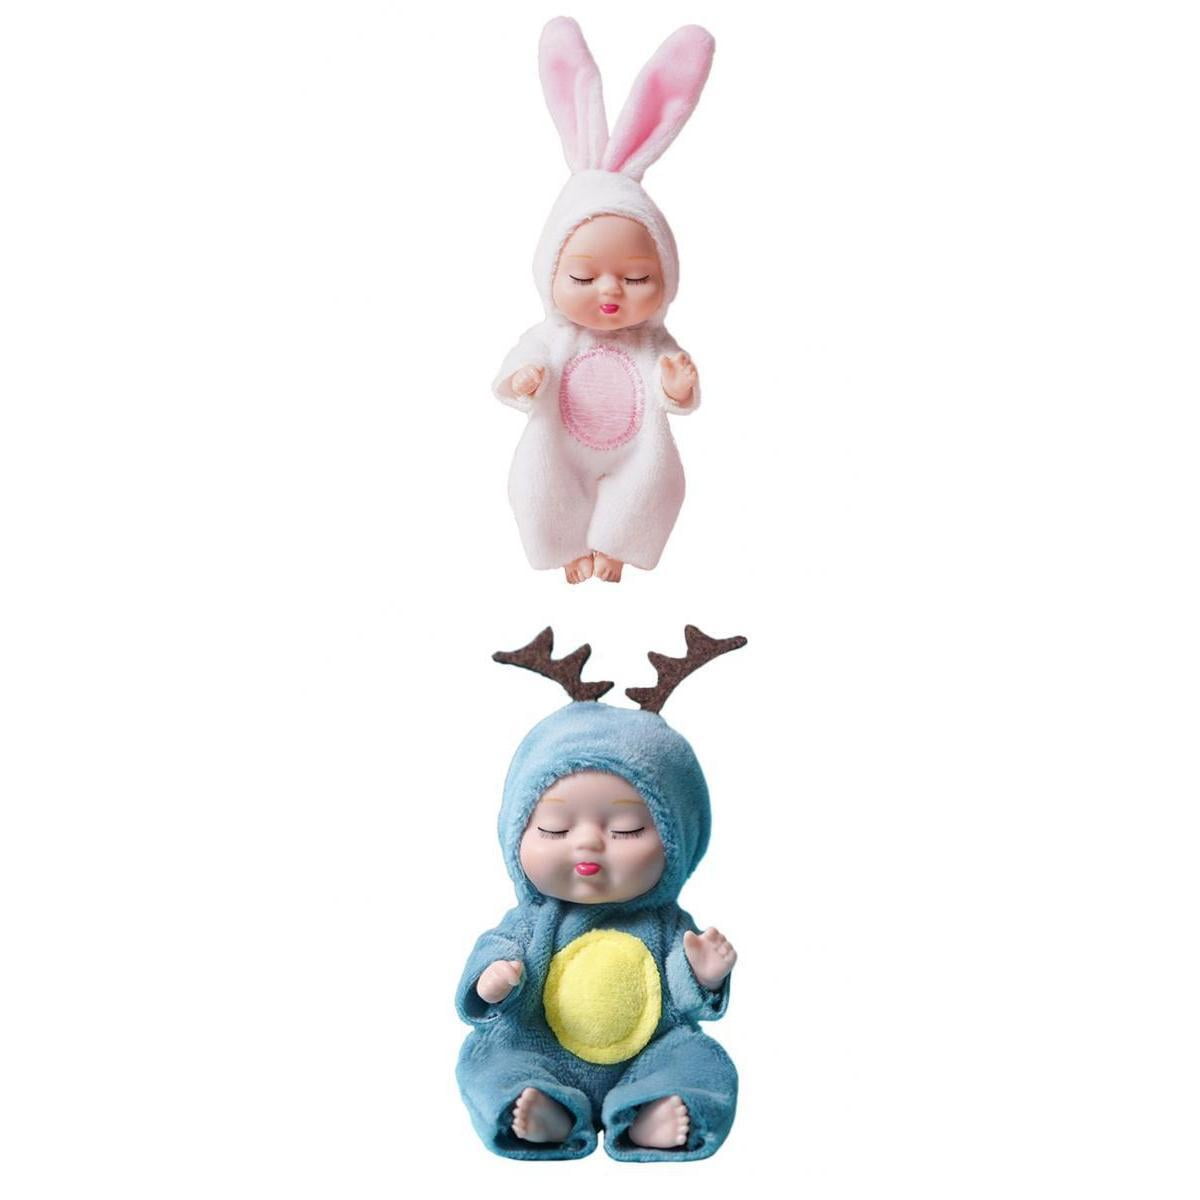 2Pcs Cute Baby Dolls Expression Interactive Mini Doll Cell Phone Keychain ToSP 